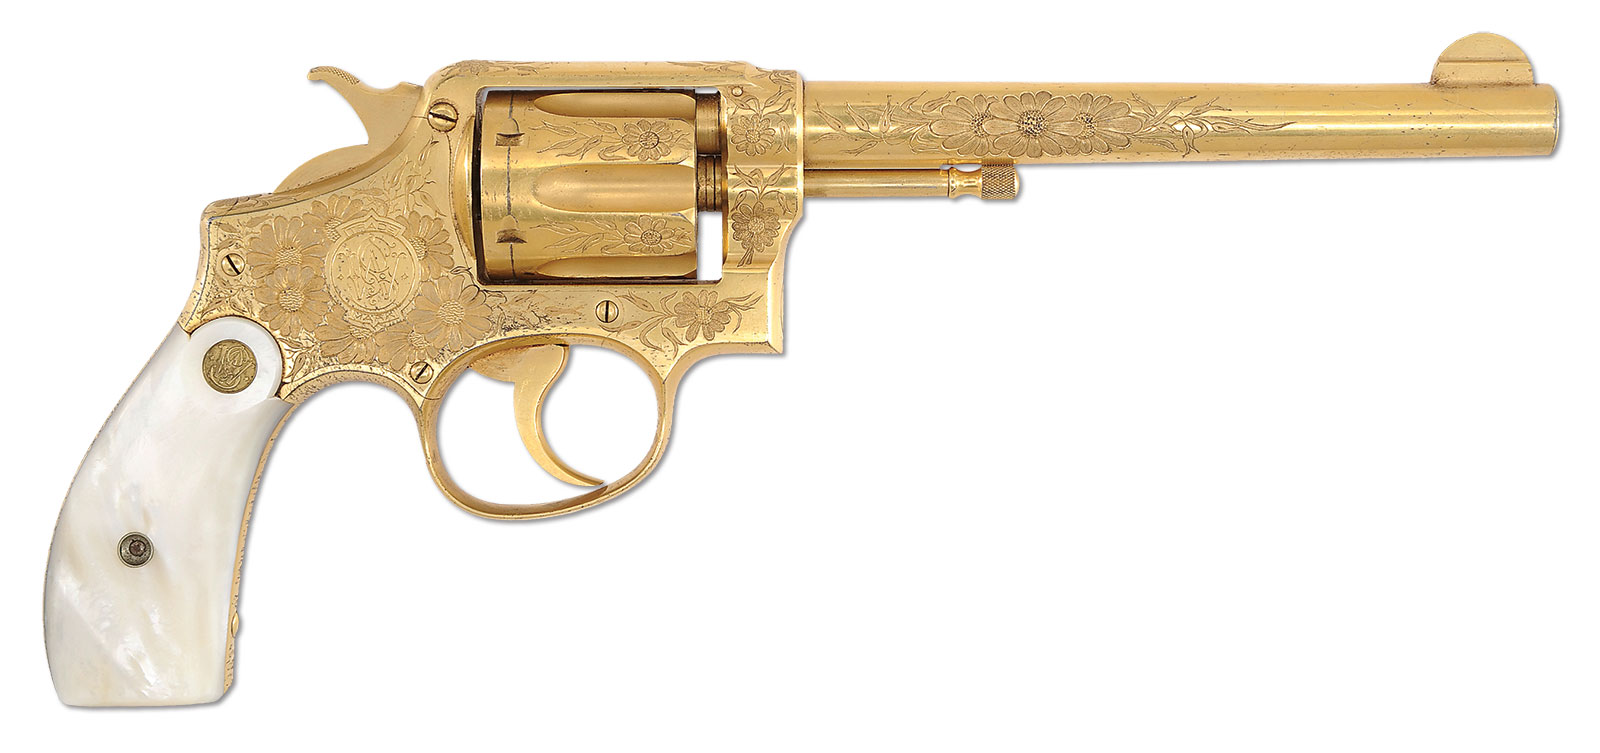 Extremely Rare Factory Engraved Gold-Plated Smith & Wesson 38 Hand Ejector 1st Model DA Revolver for Pan American Expo, Buffalo, NY 1901, Sold for $23,000